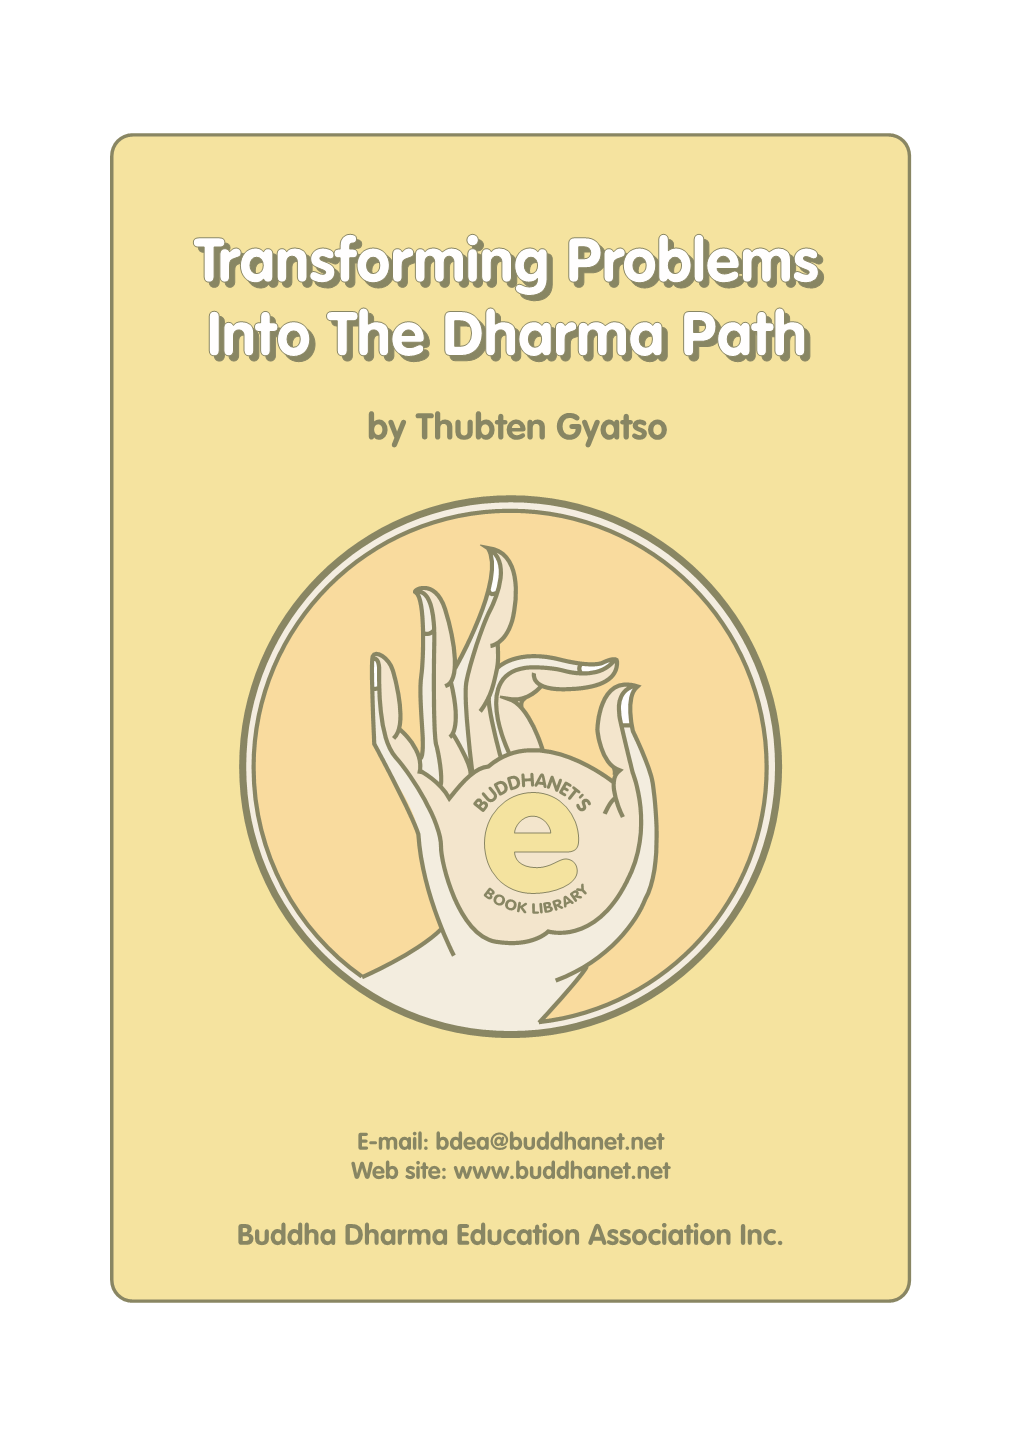 Transforming Problems Into the Dharma Path